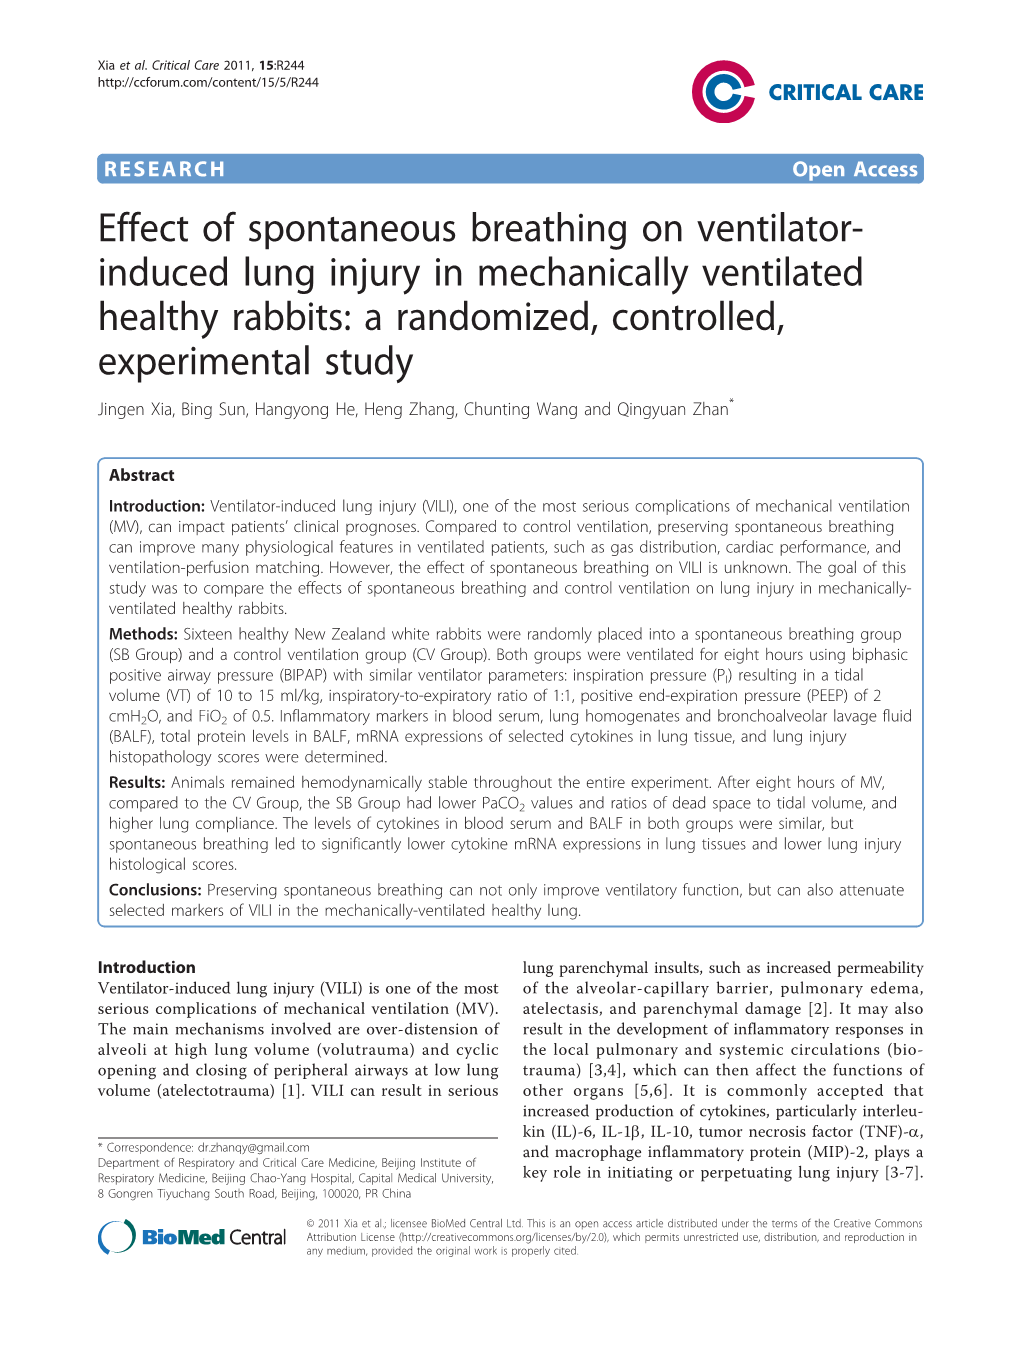 Effect of Spontaneous Breathing on Ventilator- Induced Lung Injury In